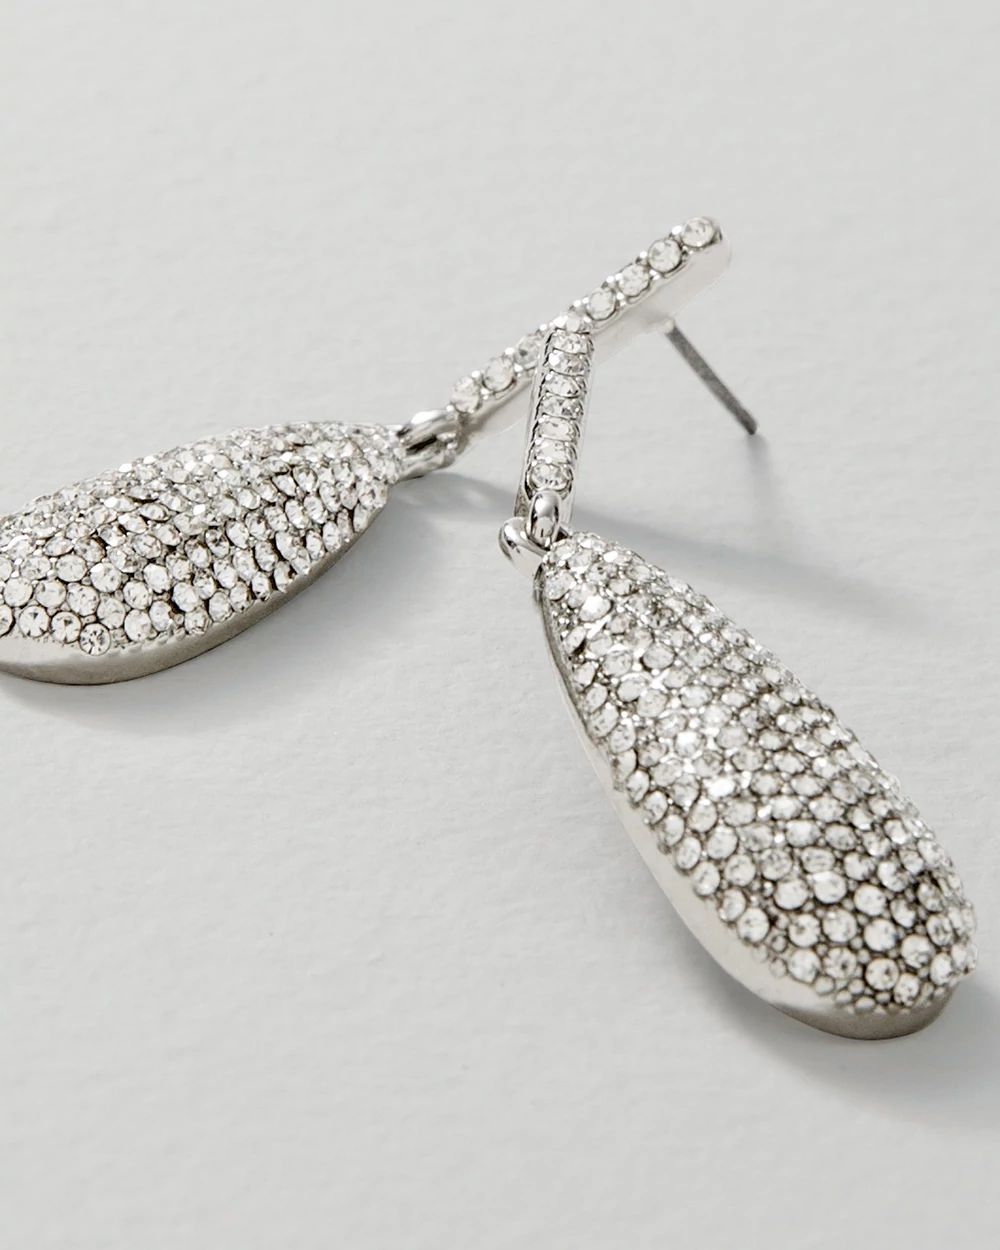 Pavé Silvertone Teardrop Earrings click to view larger image.